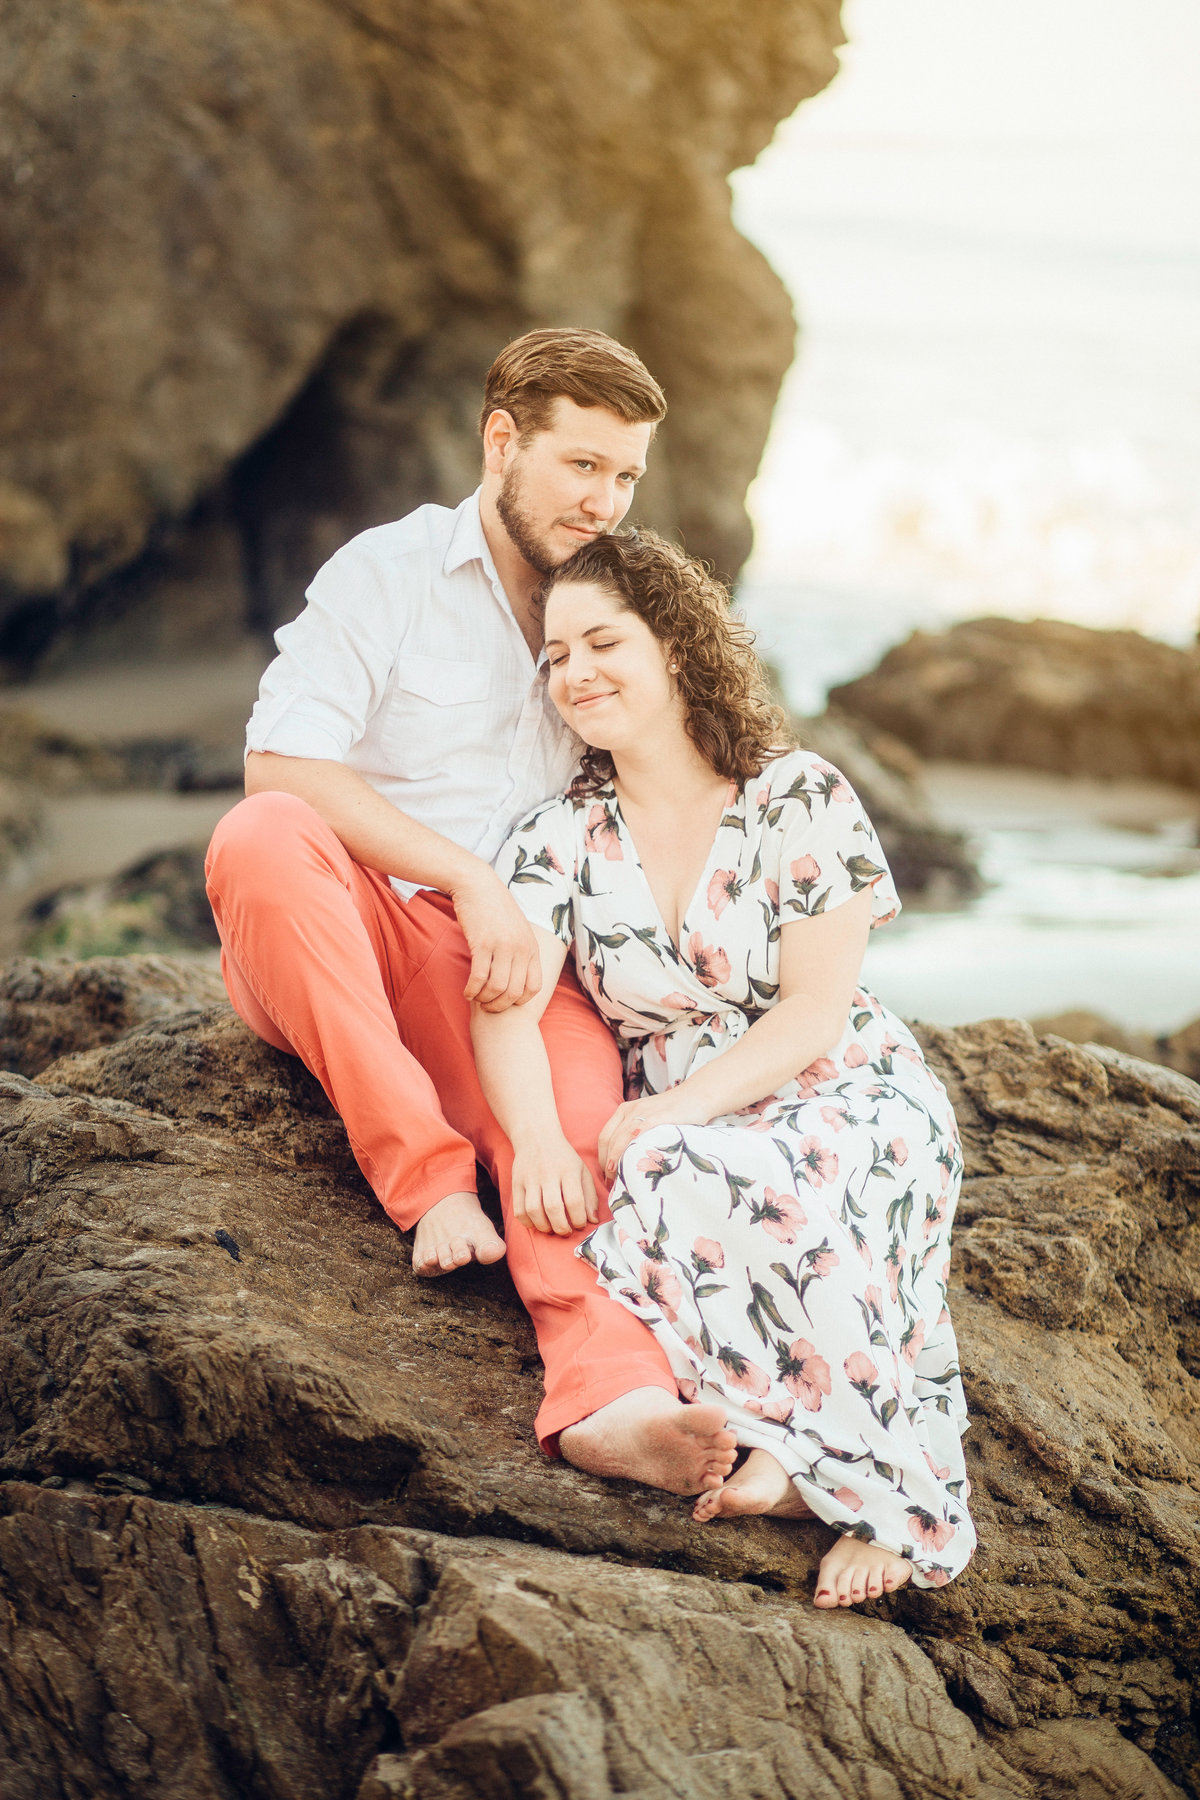 Engagement Photograph Of  Man In White Polo And Woman In Floral Dress Los Angeles